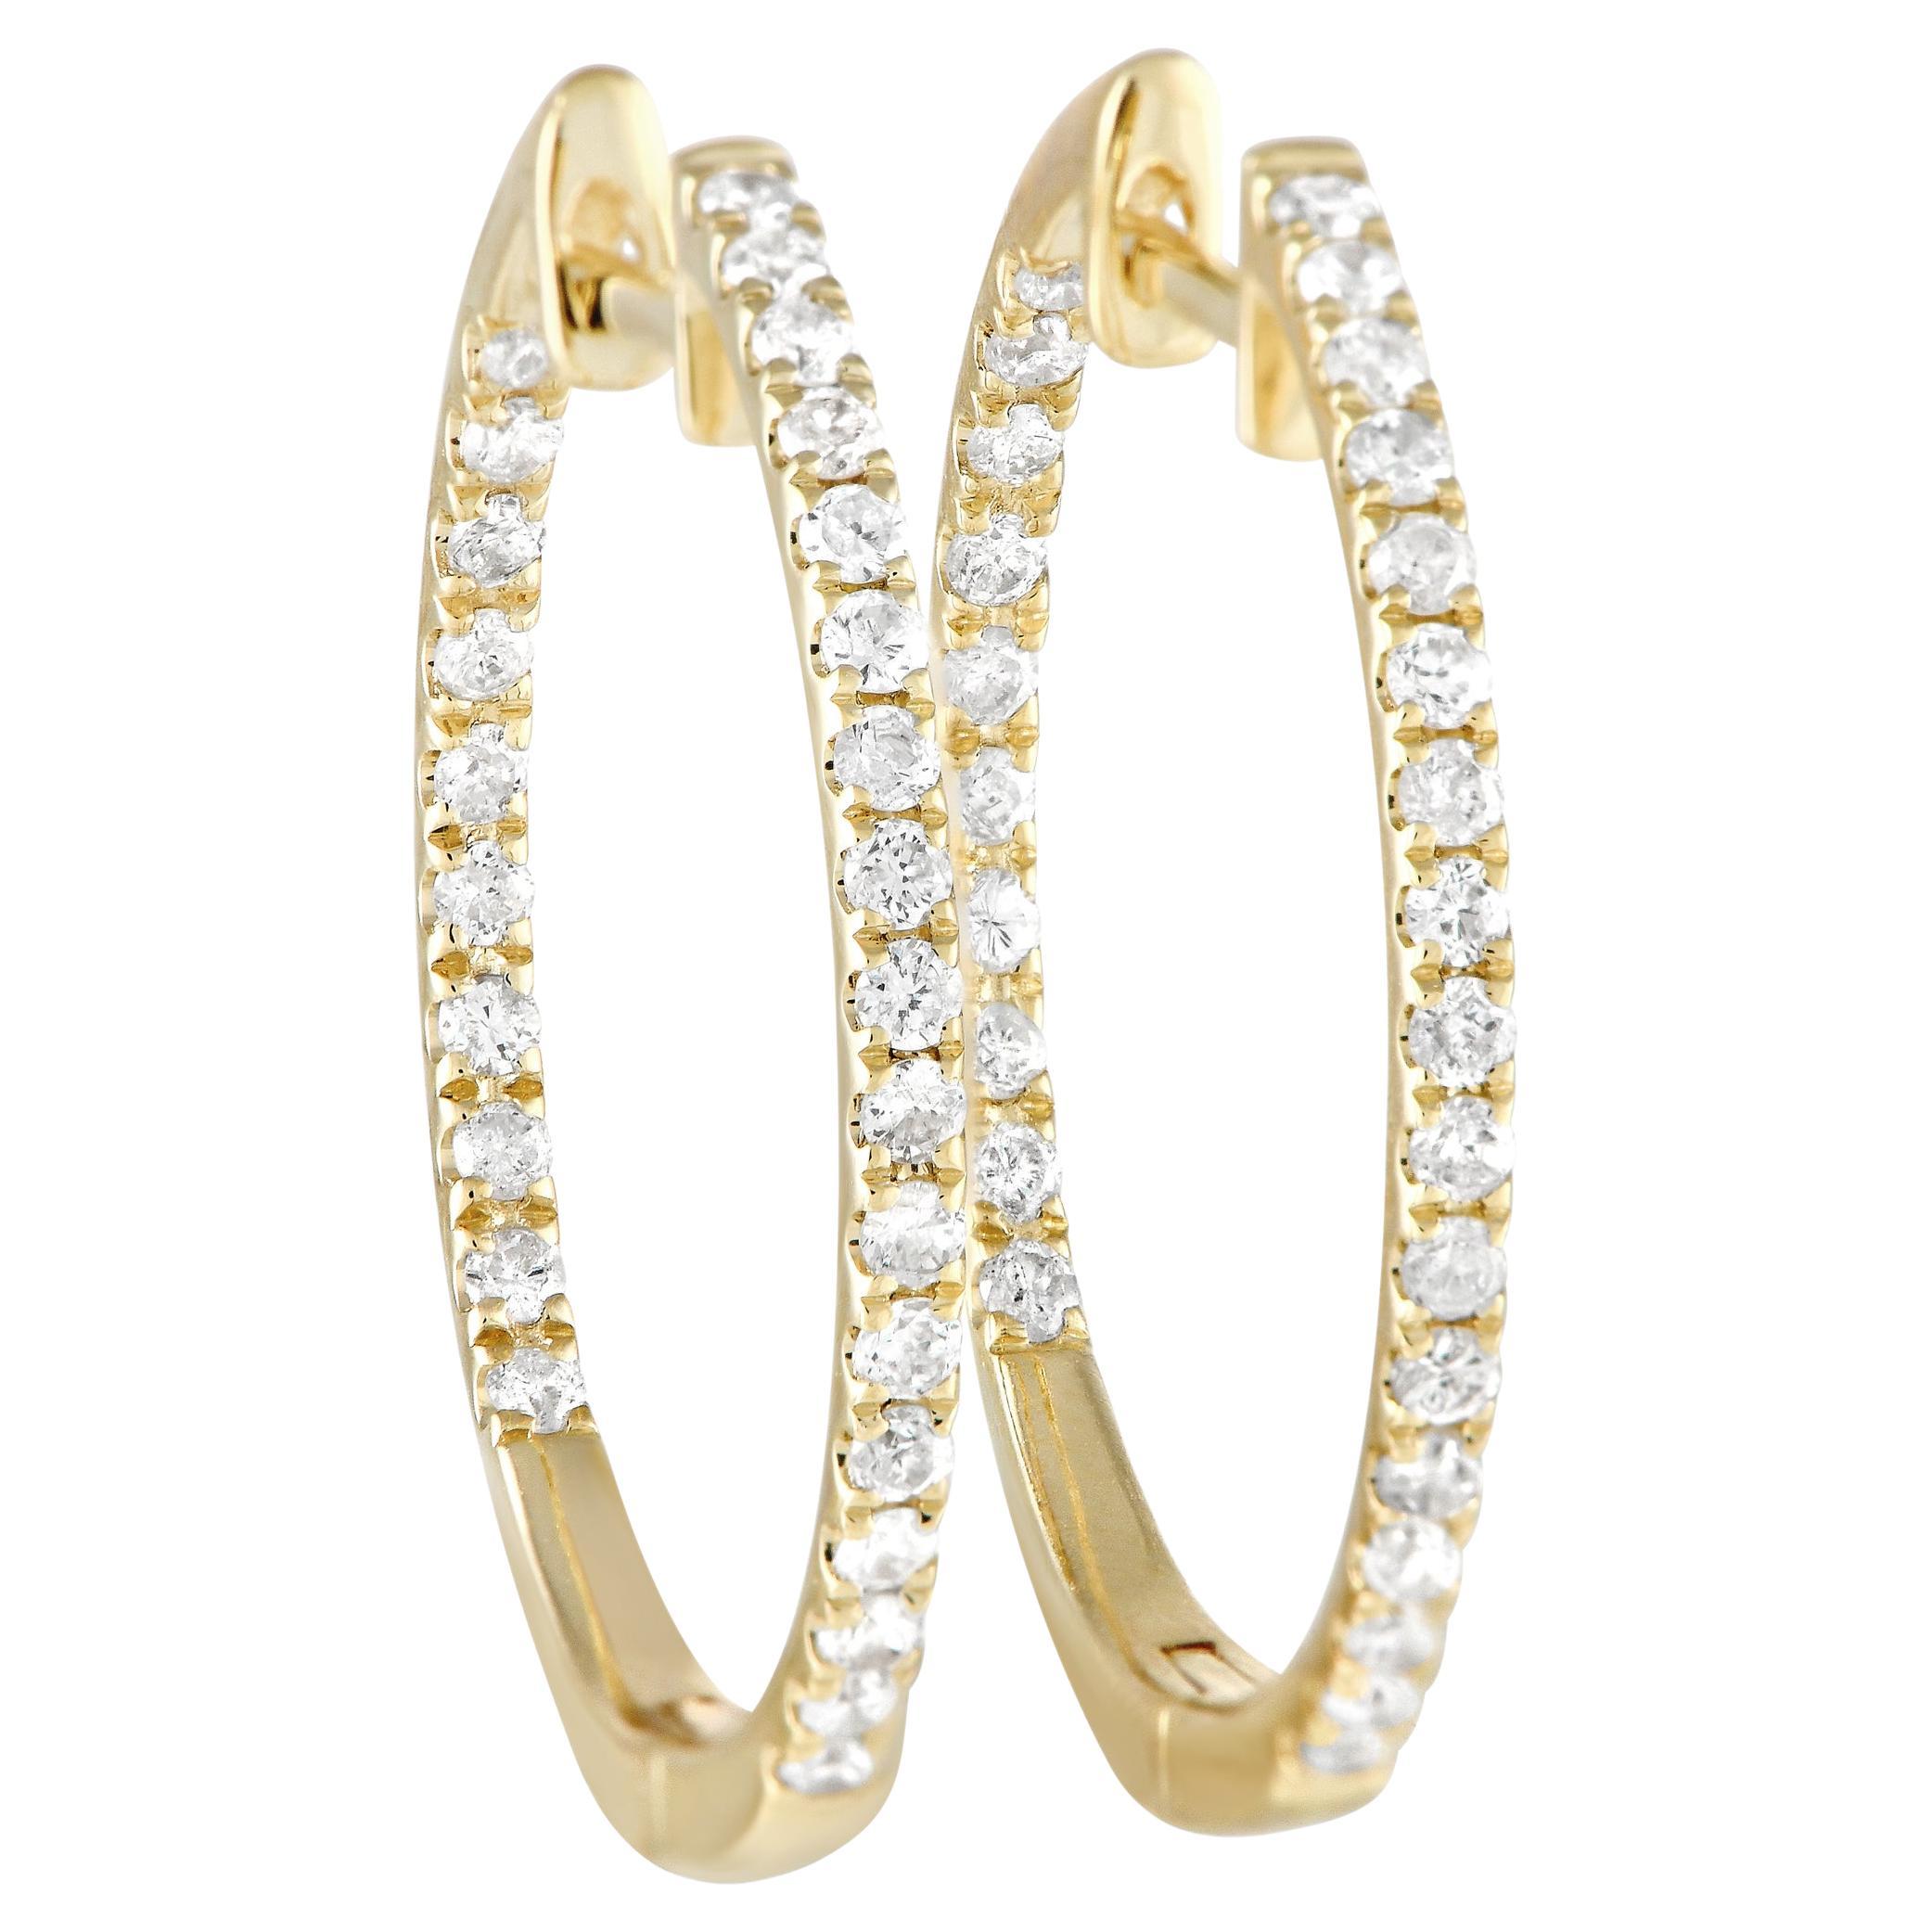 LB Exclusive 14k Yellow Gold 0.50 Carat Diamond Inside-Out Hoop Earrings For Sale